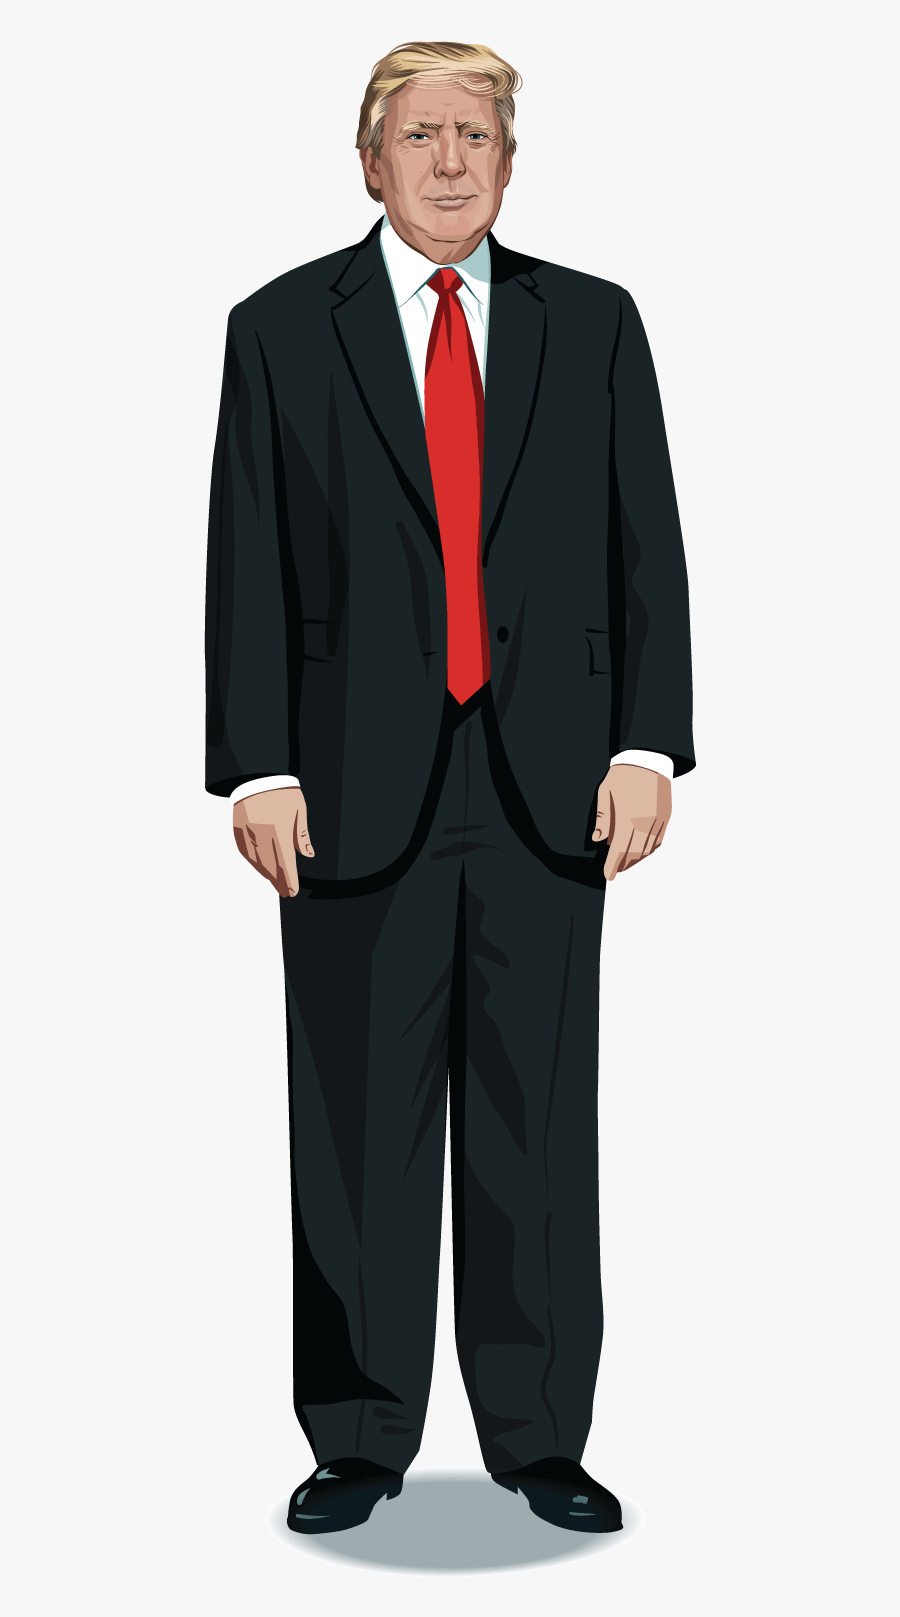 Donald Trump, Who Winning The Presidential Election - Full Body Trump Png, Transparent Clipart